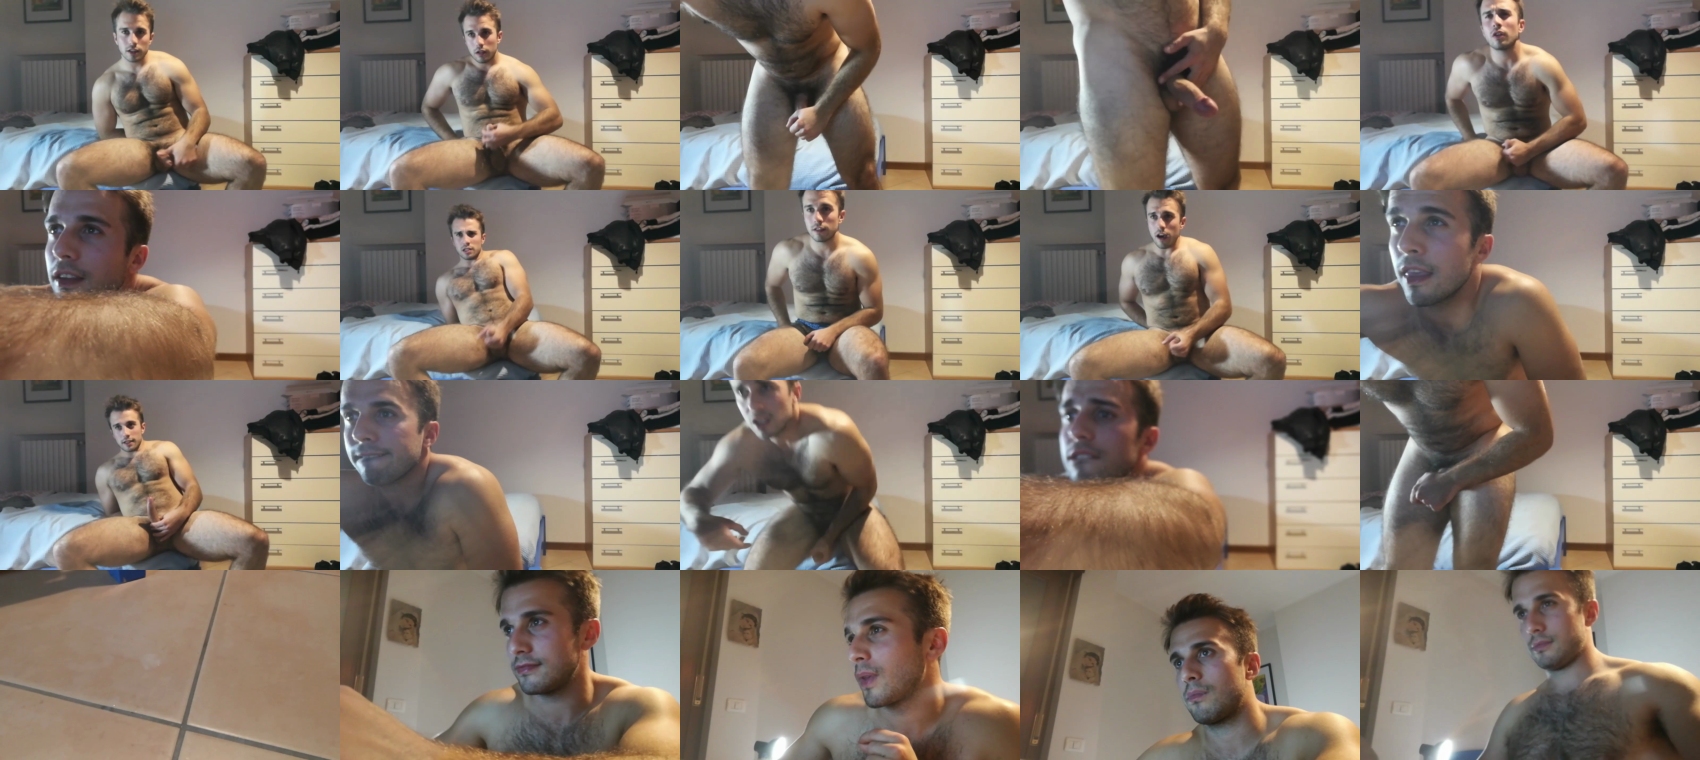 jack_yanfry Naked CAM SHOW @ Chaturbate 09-11-2022